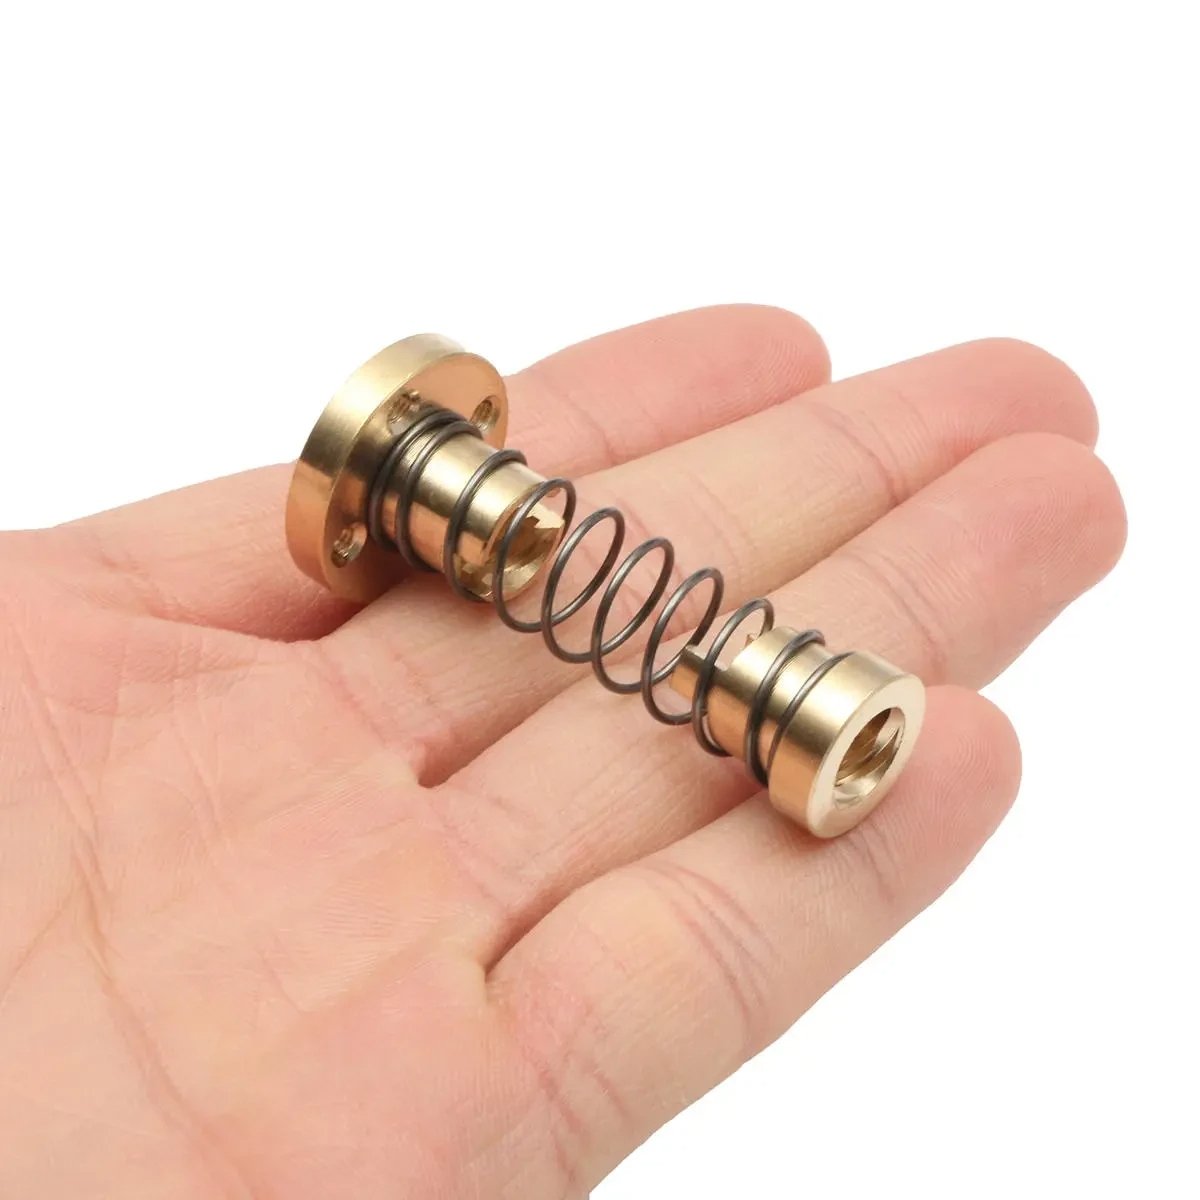 1pc T8 Anti-Backlash Spring Loaded Nut For 8mm Acme Threaded Rod Lead Screw - 8mm